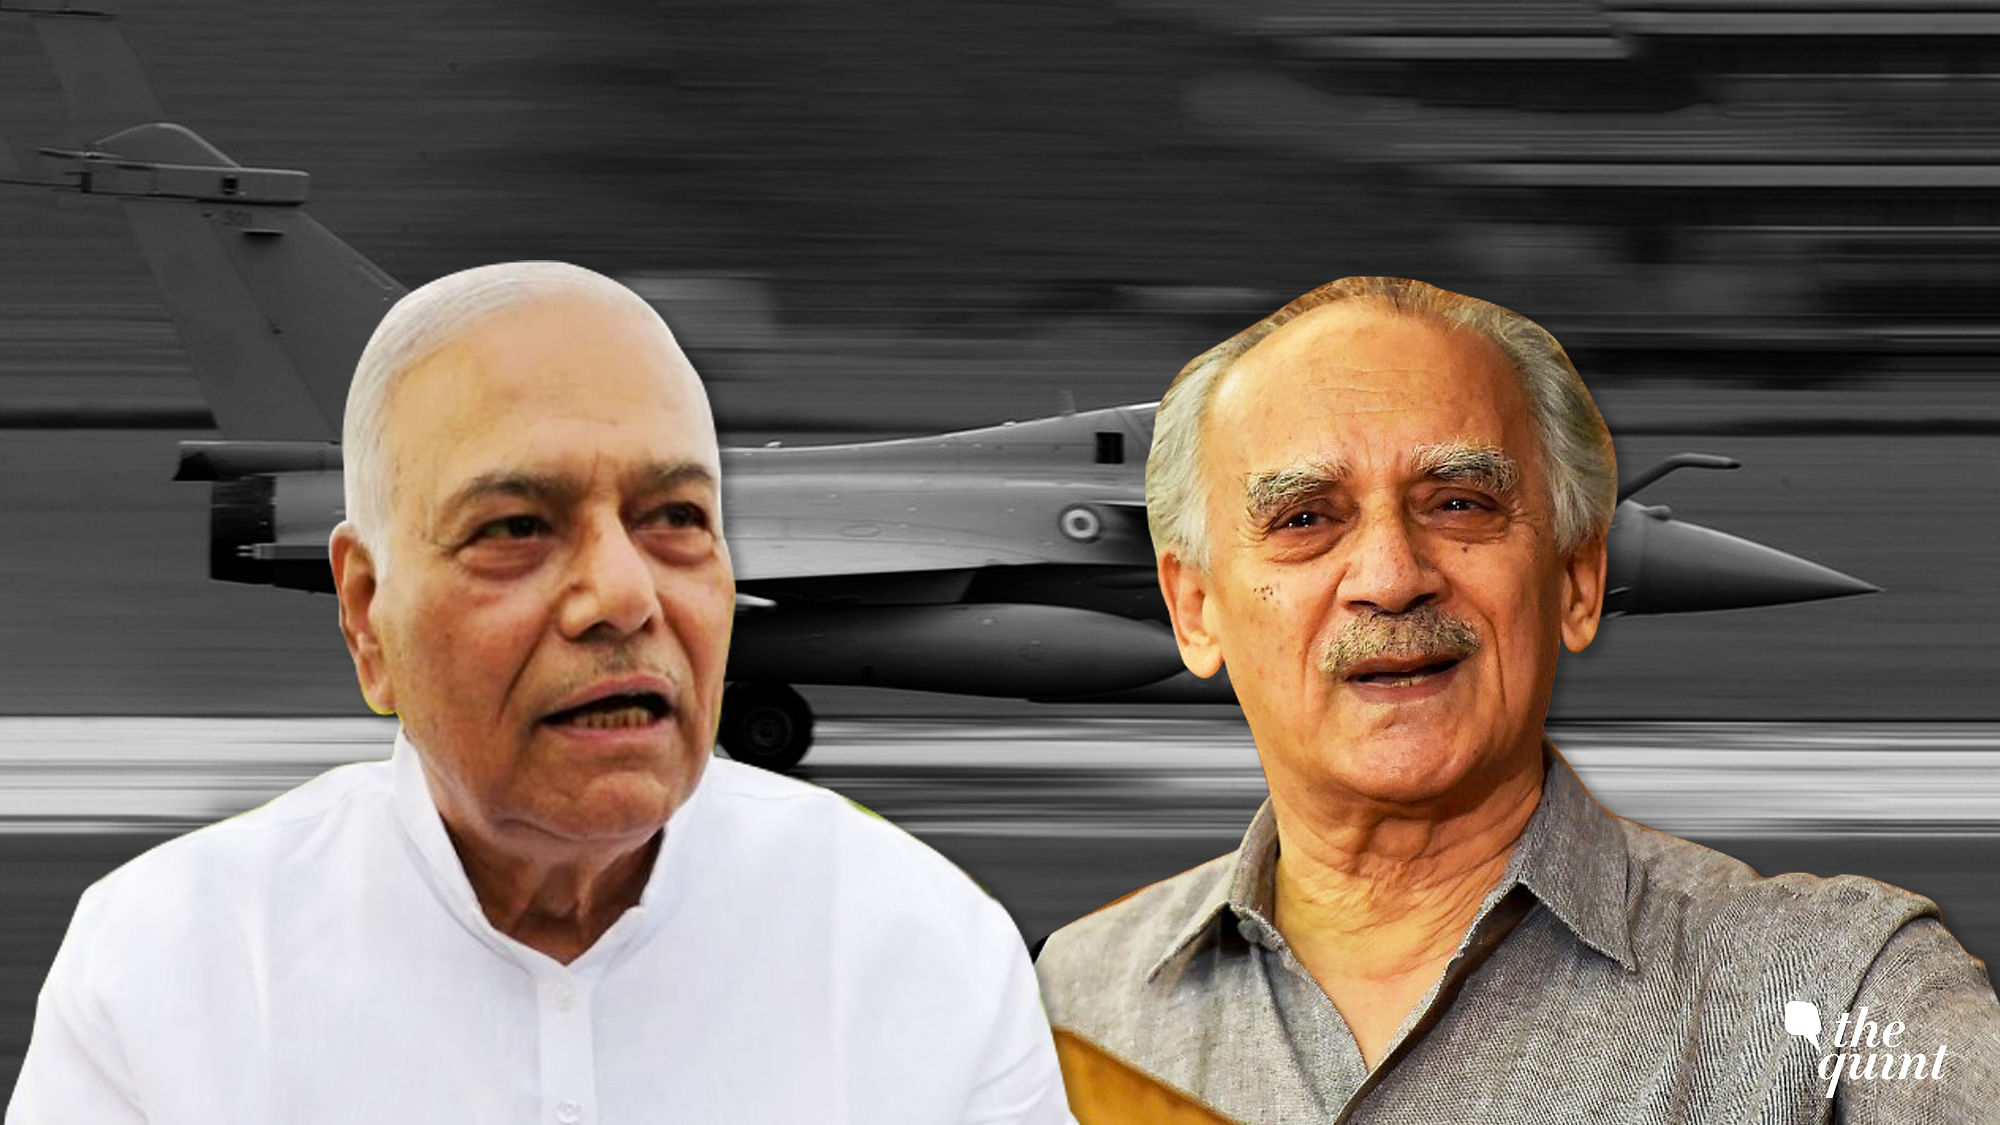 Arun Shourie, Yashwant Sinha and Prashant Bhushan, who had filed one of the petitions heard by the Supreme Court before passing its Rafale verdict, have now filed a review petition against the judgment of 14 December.